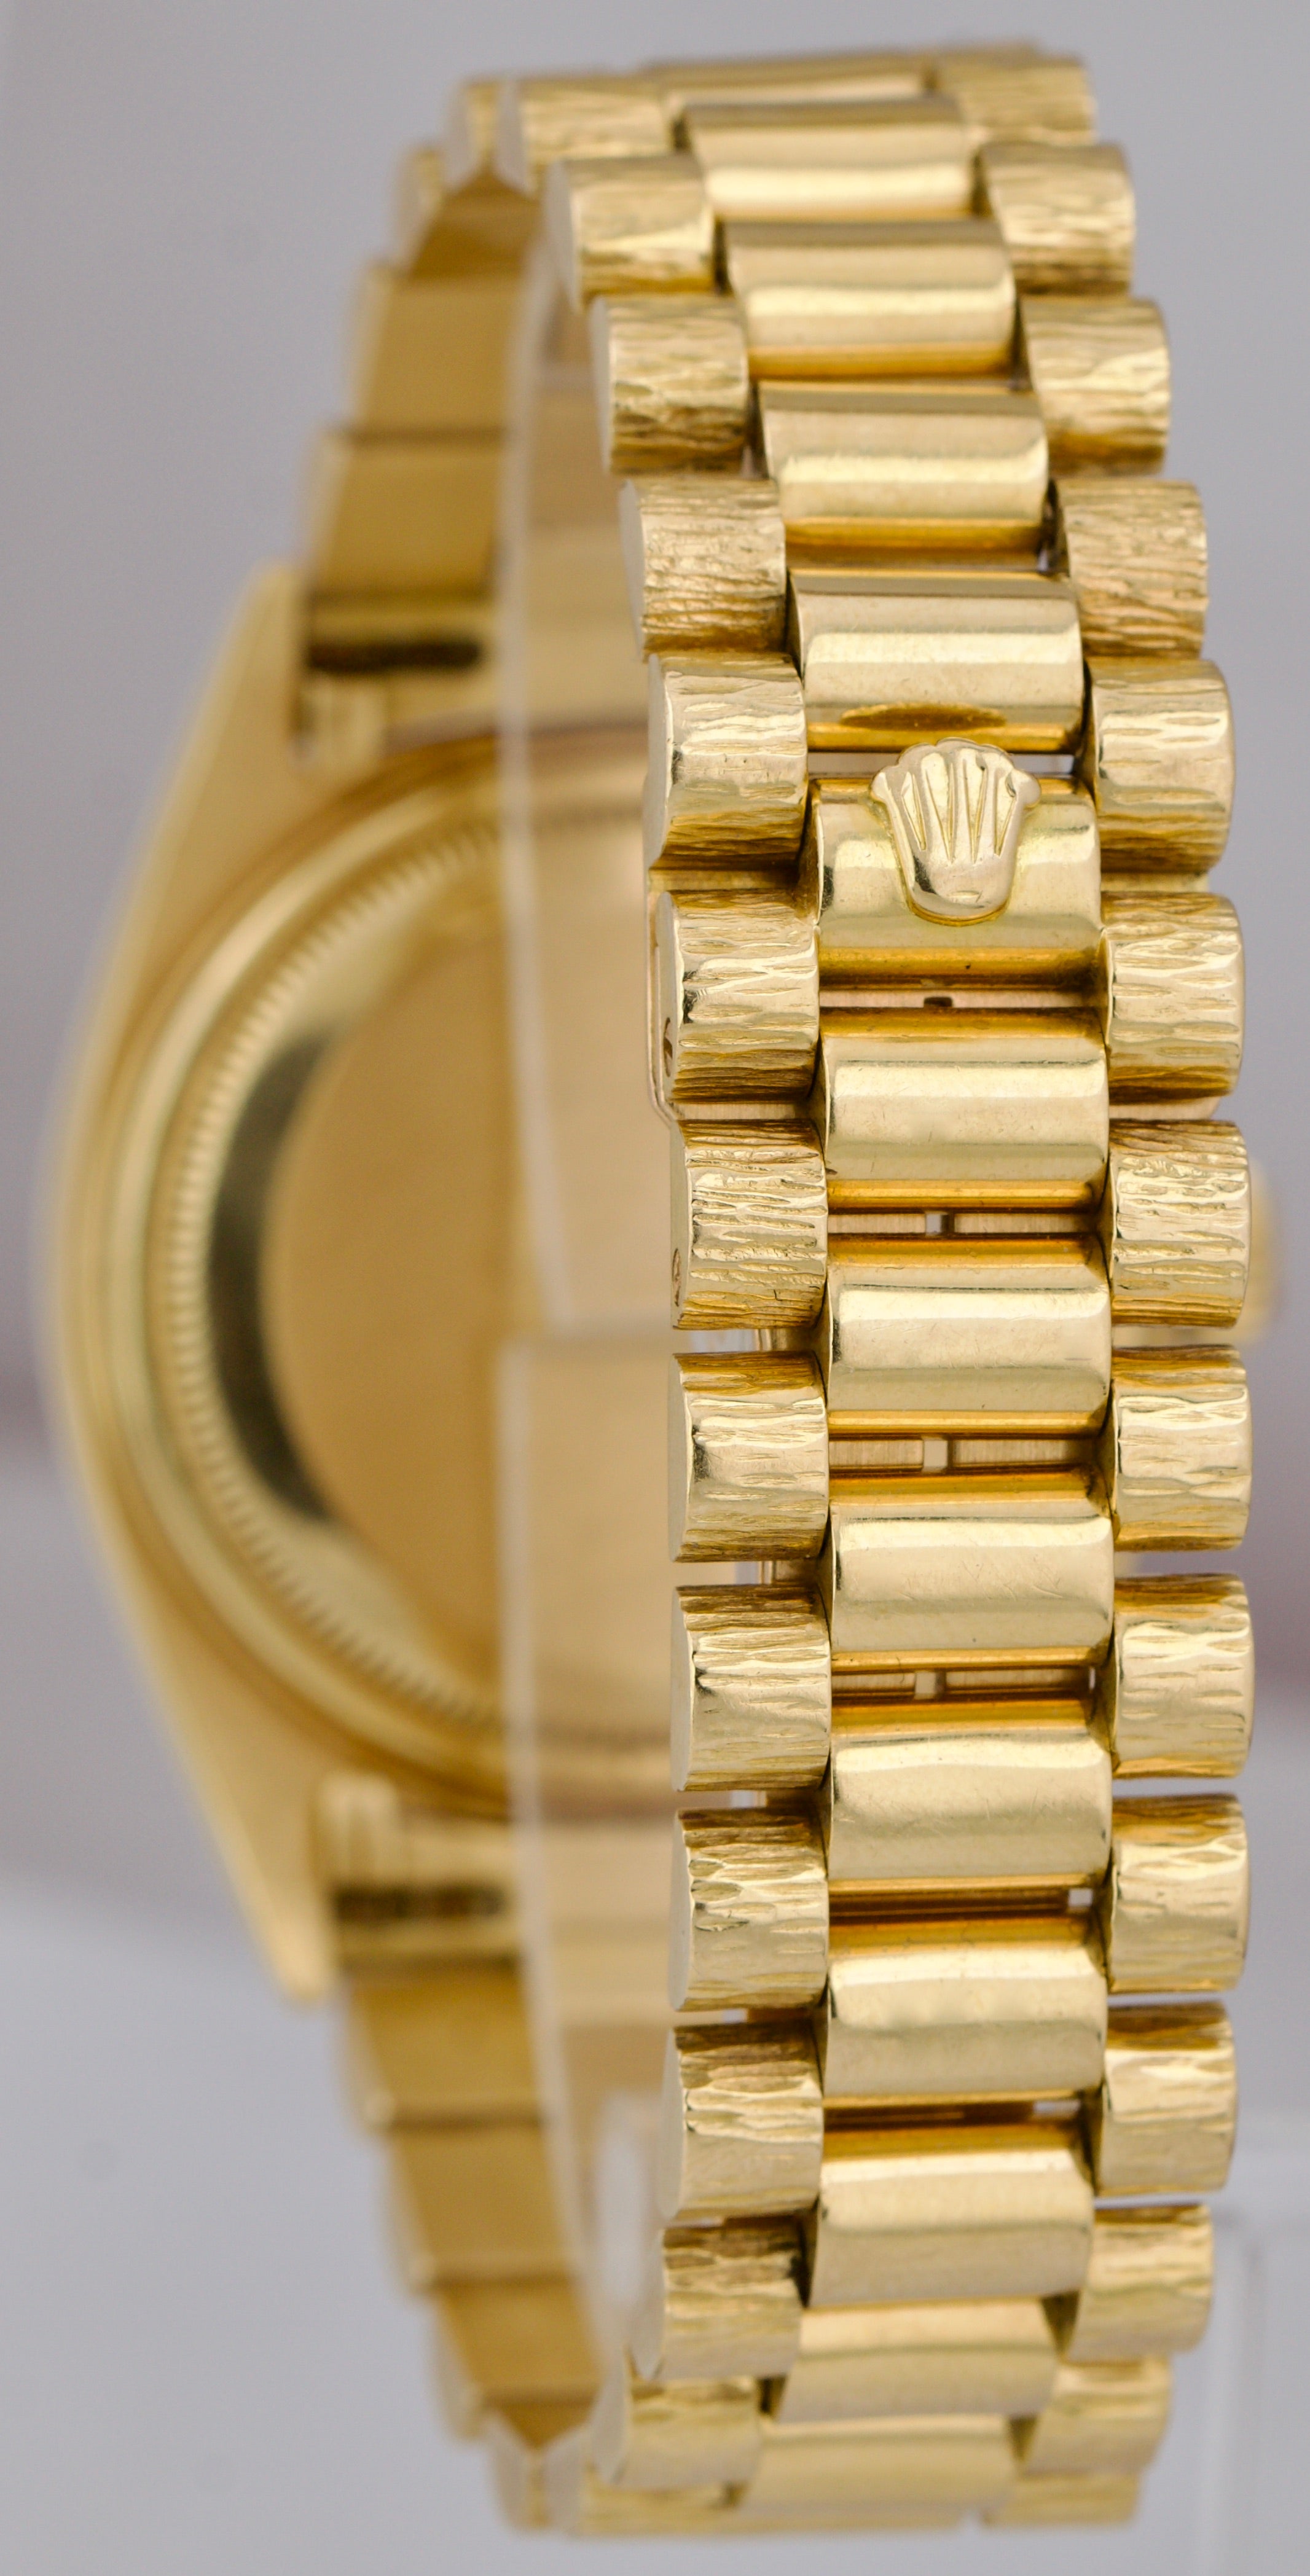 Rolex Day-Date President Champagne 36mm Bark Finish 18K Yellow Gold Watch 1803